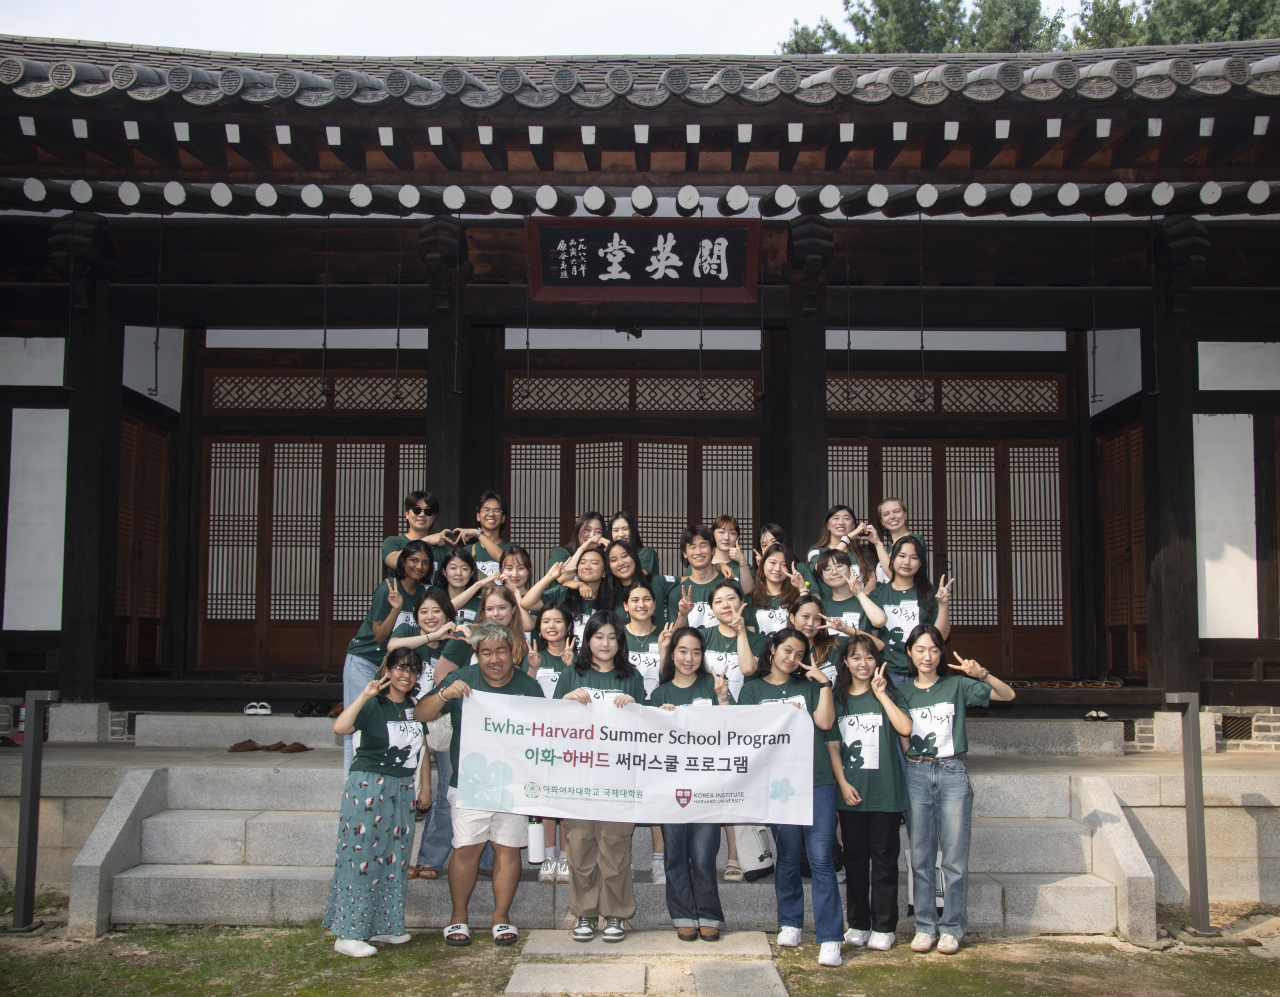 Students of Harvard University and Ewha Womans University participating in a joint summer school program this summer pose for a photo in Seoul. (Ewha Womans University)